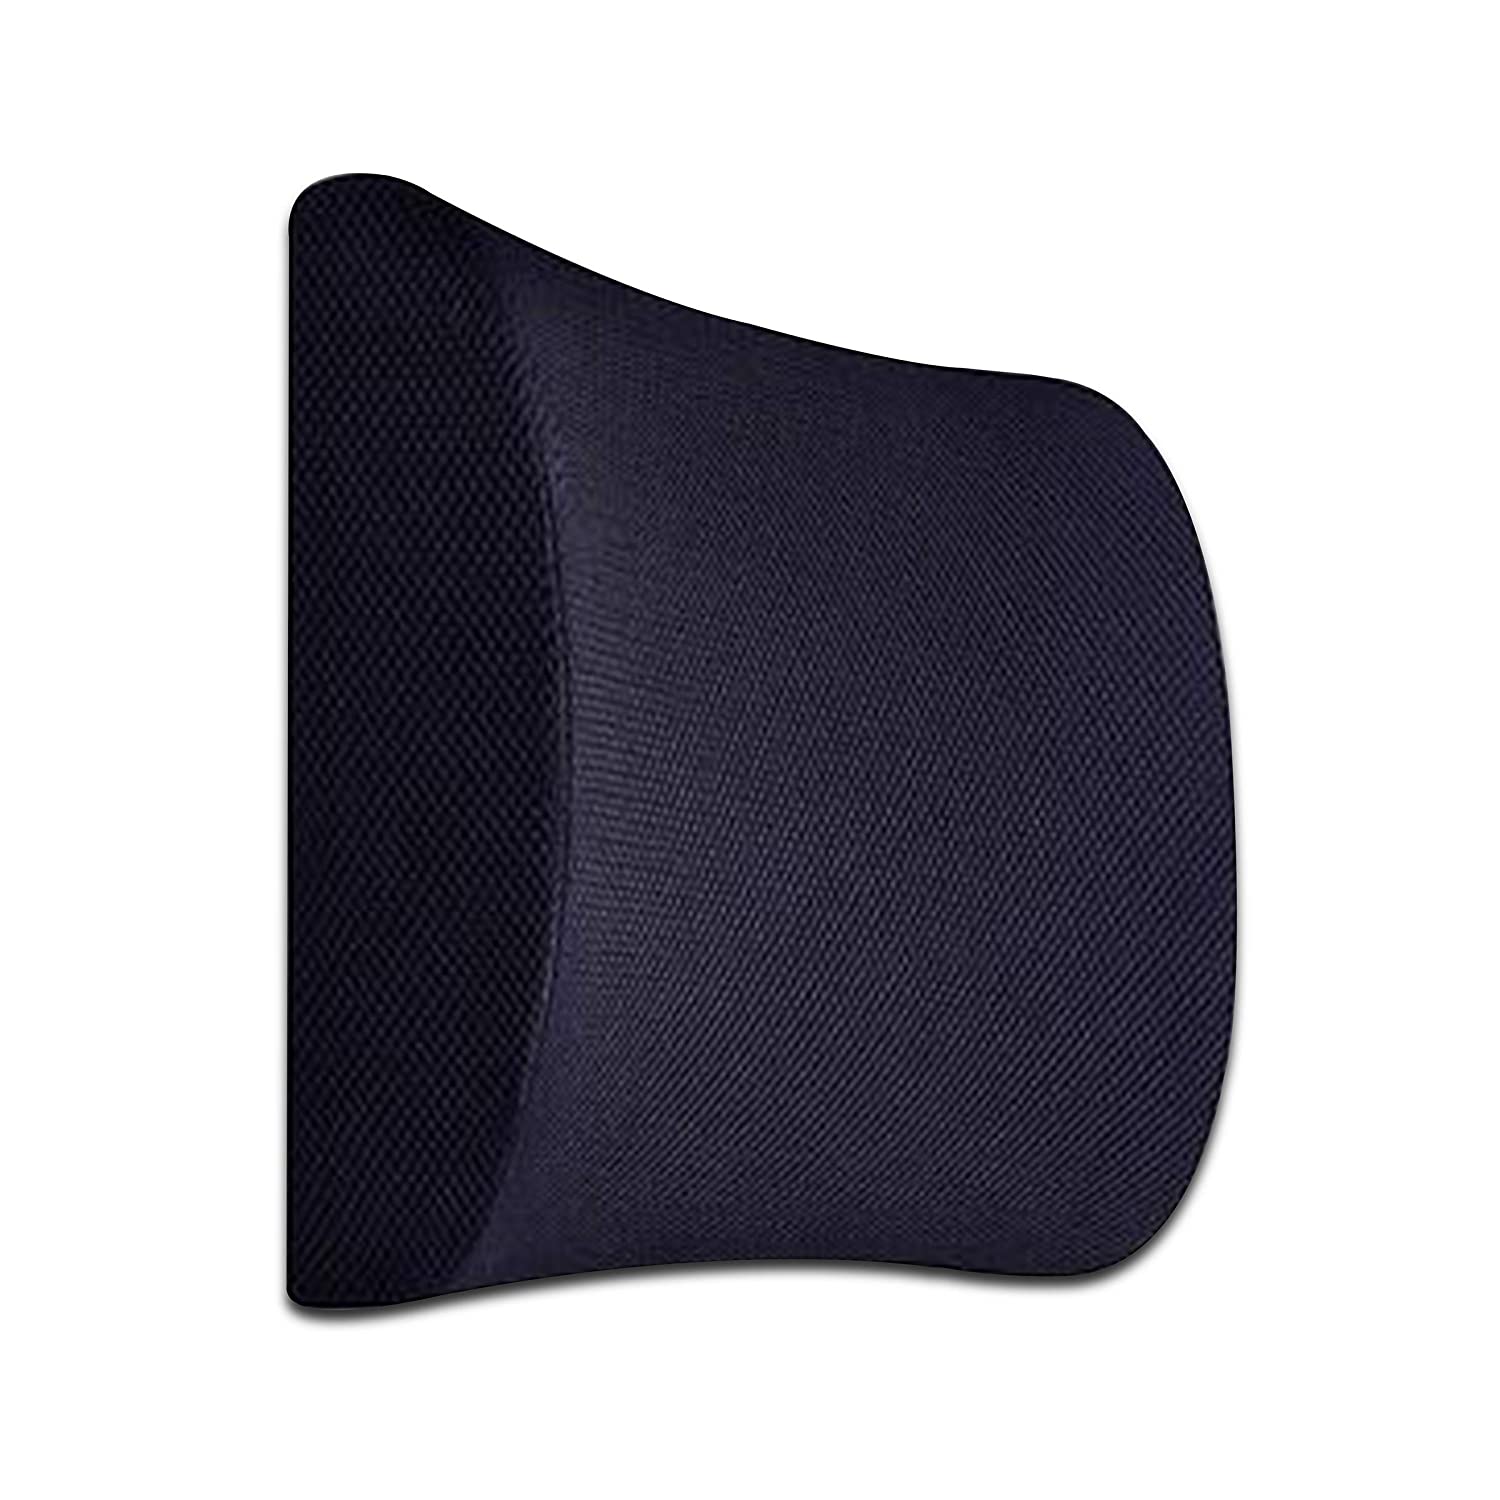 SAMSONITE Lumbar Support Pillow For Office Chair and Car Seat, Perfectly  Balanced Memory Foam , Versatile Use Lower Back Cushion